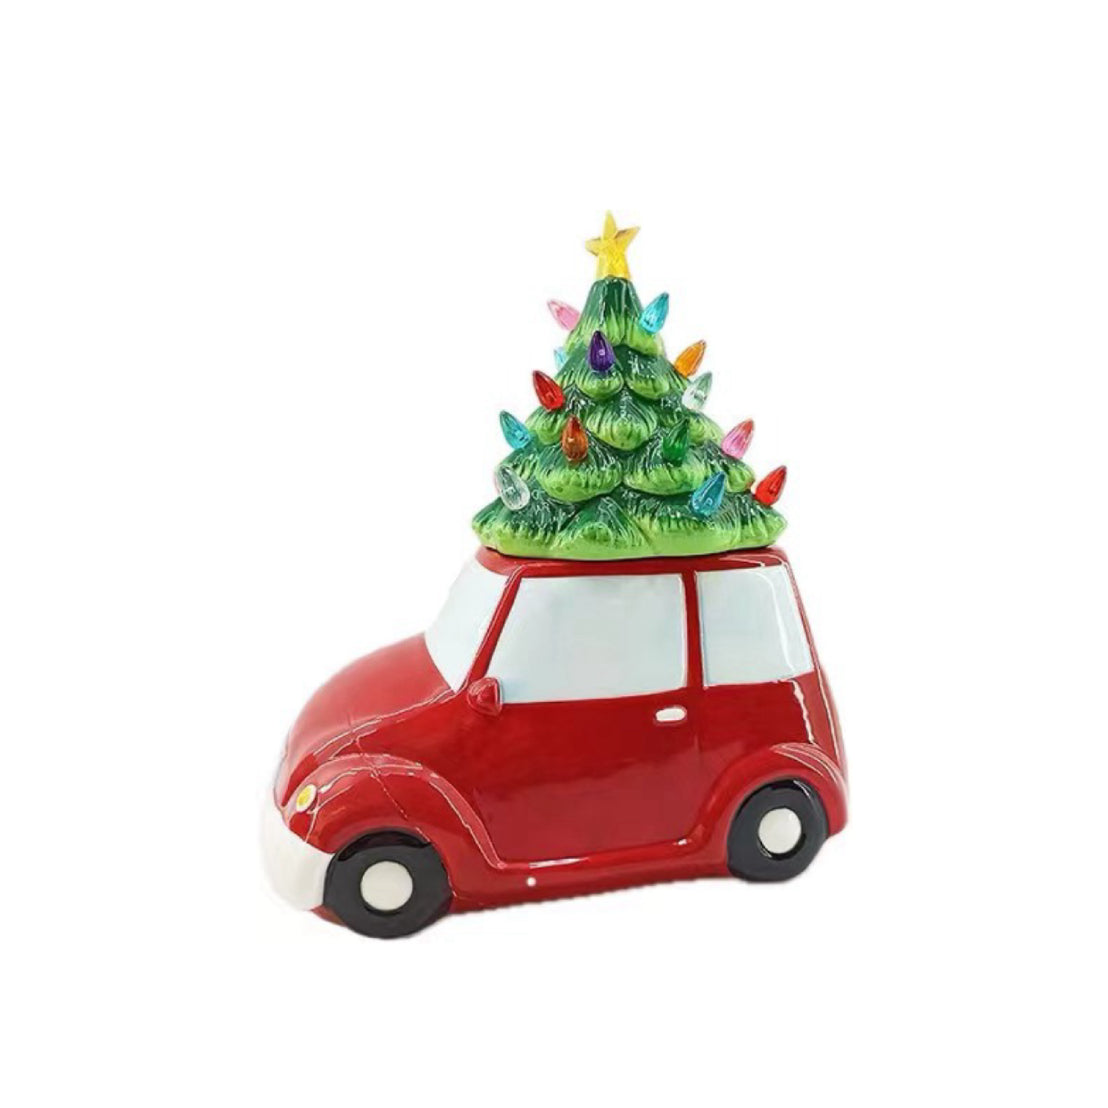 Vintage Truck with Christmas Tree Cookie Jar, 10.63 x 5.7 x 8.46 Inches, American Hand-Painted Ceramic Christmas Cookie Candy Tea Jar, Cute Kitchen Countertop Storage Jar